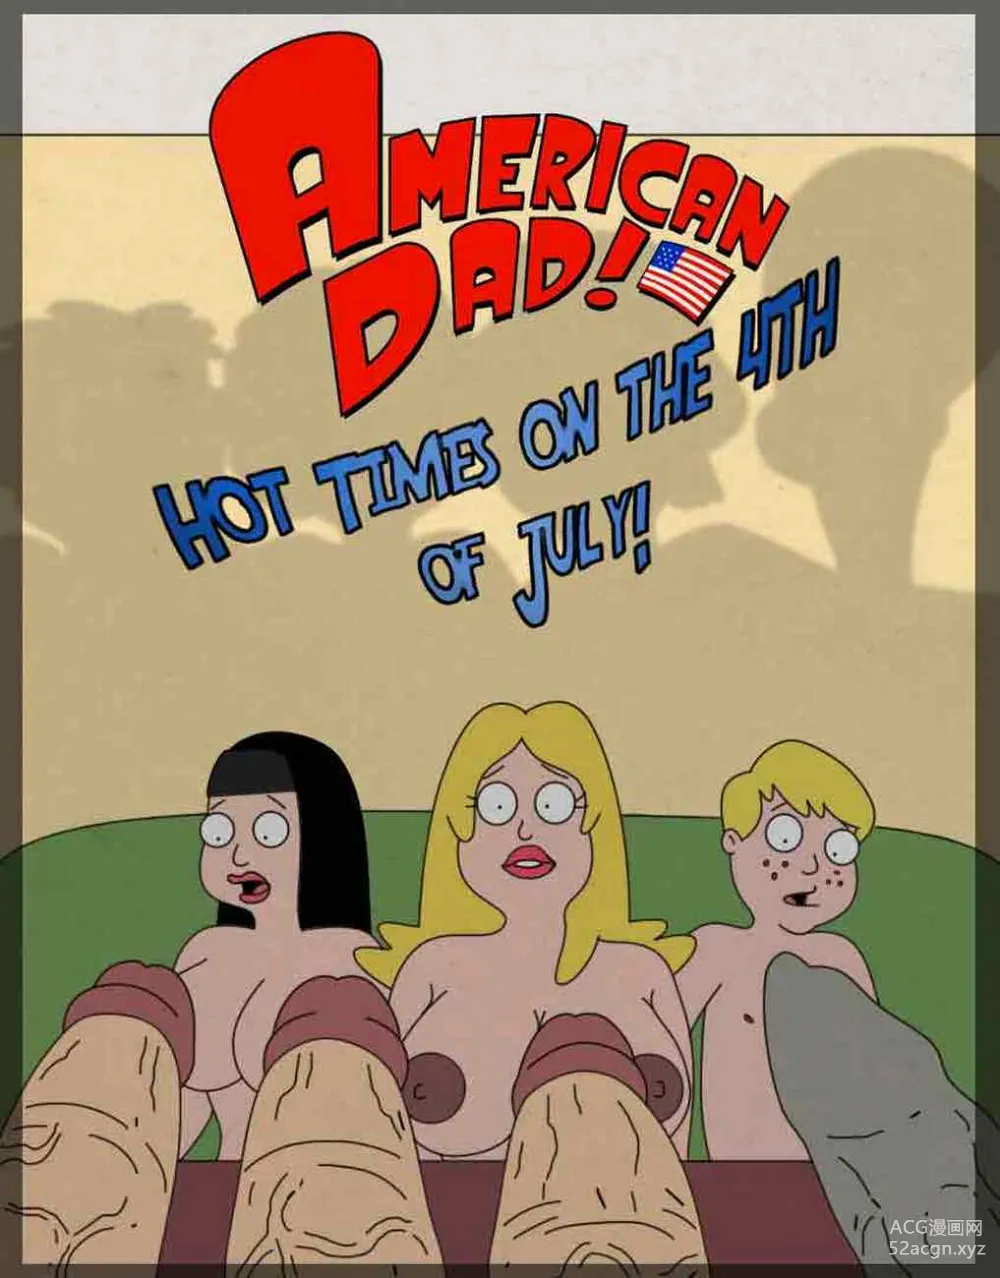 Anal American Dad Porn - Hot Times On The 4th Of July - Chapter 1 (American Dad!) - CÃ³mics porno  occidentales CÃ³mics para adultos occidentales